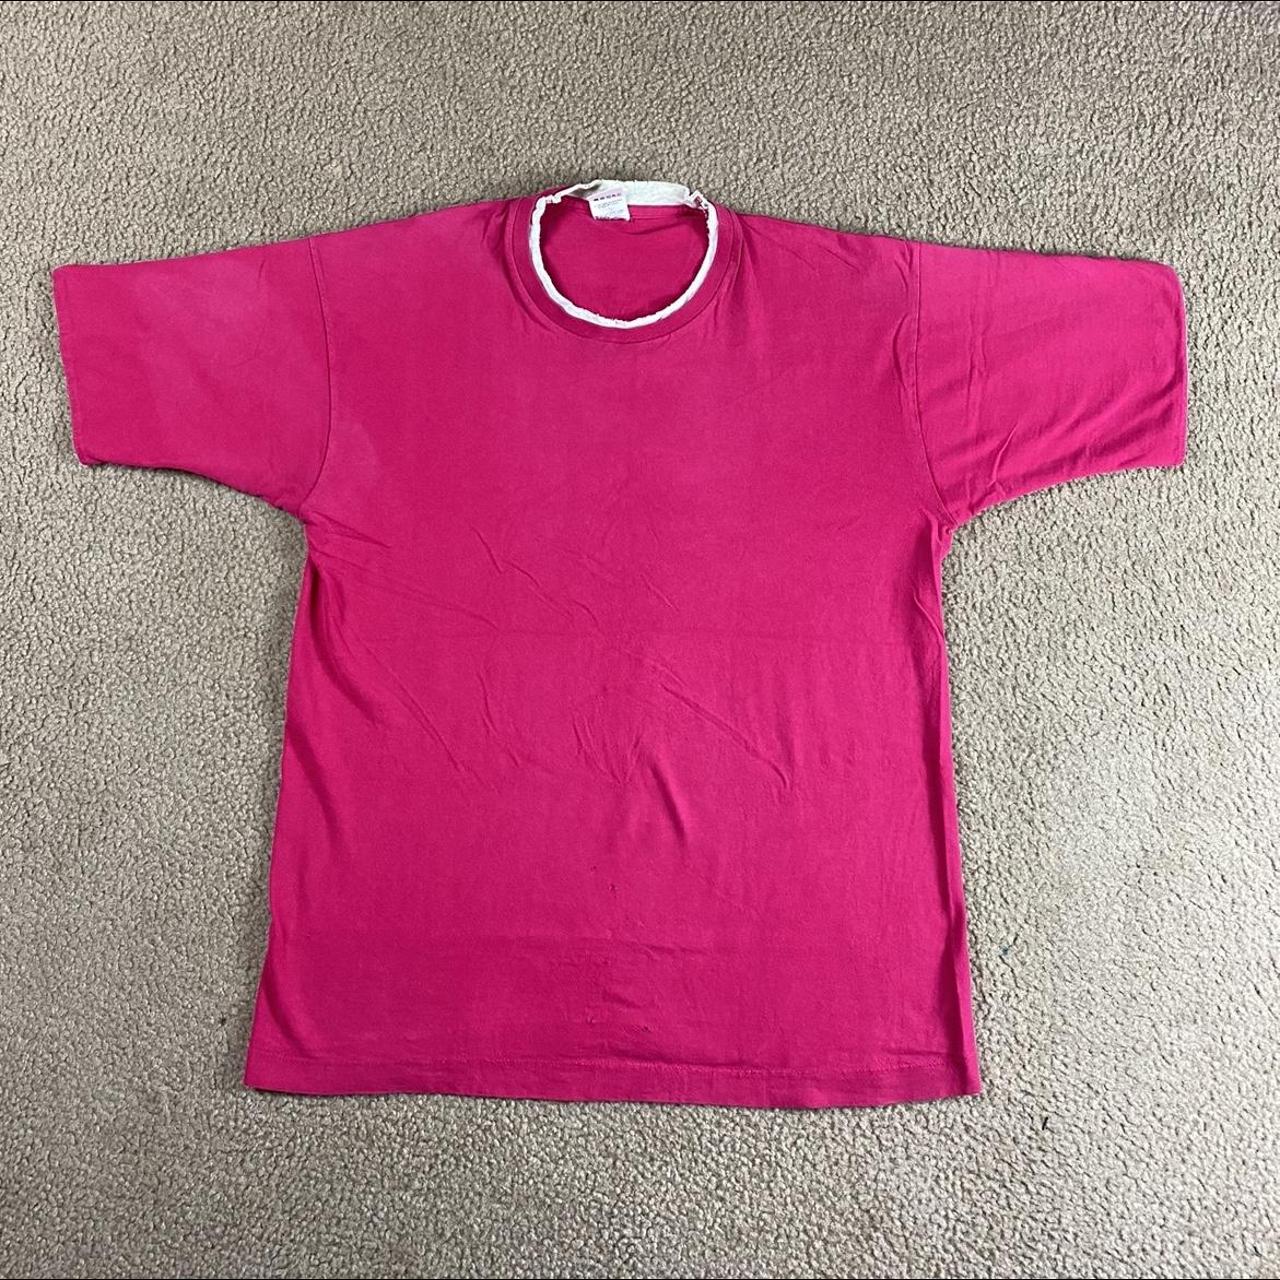 Product Image 2 - Vintage 90’s Essential Distressed Tee

double